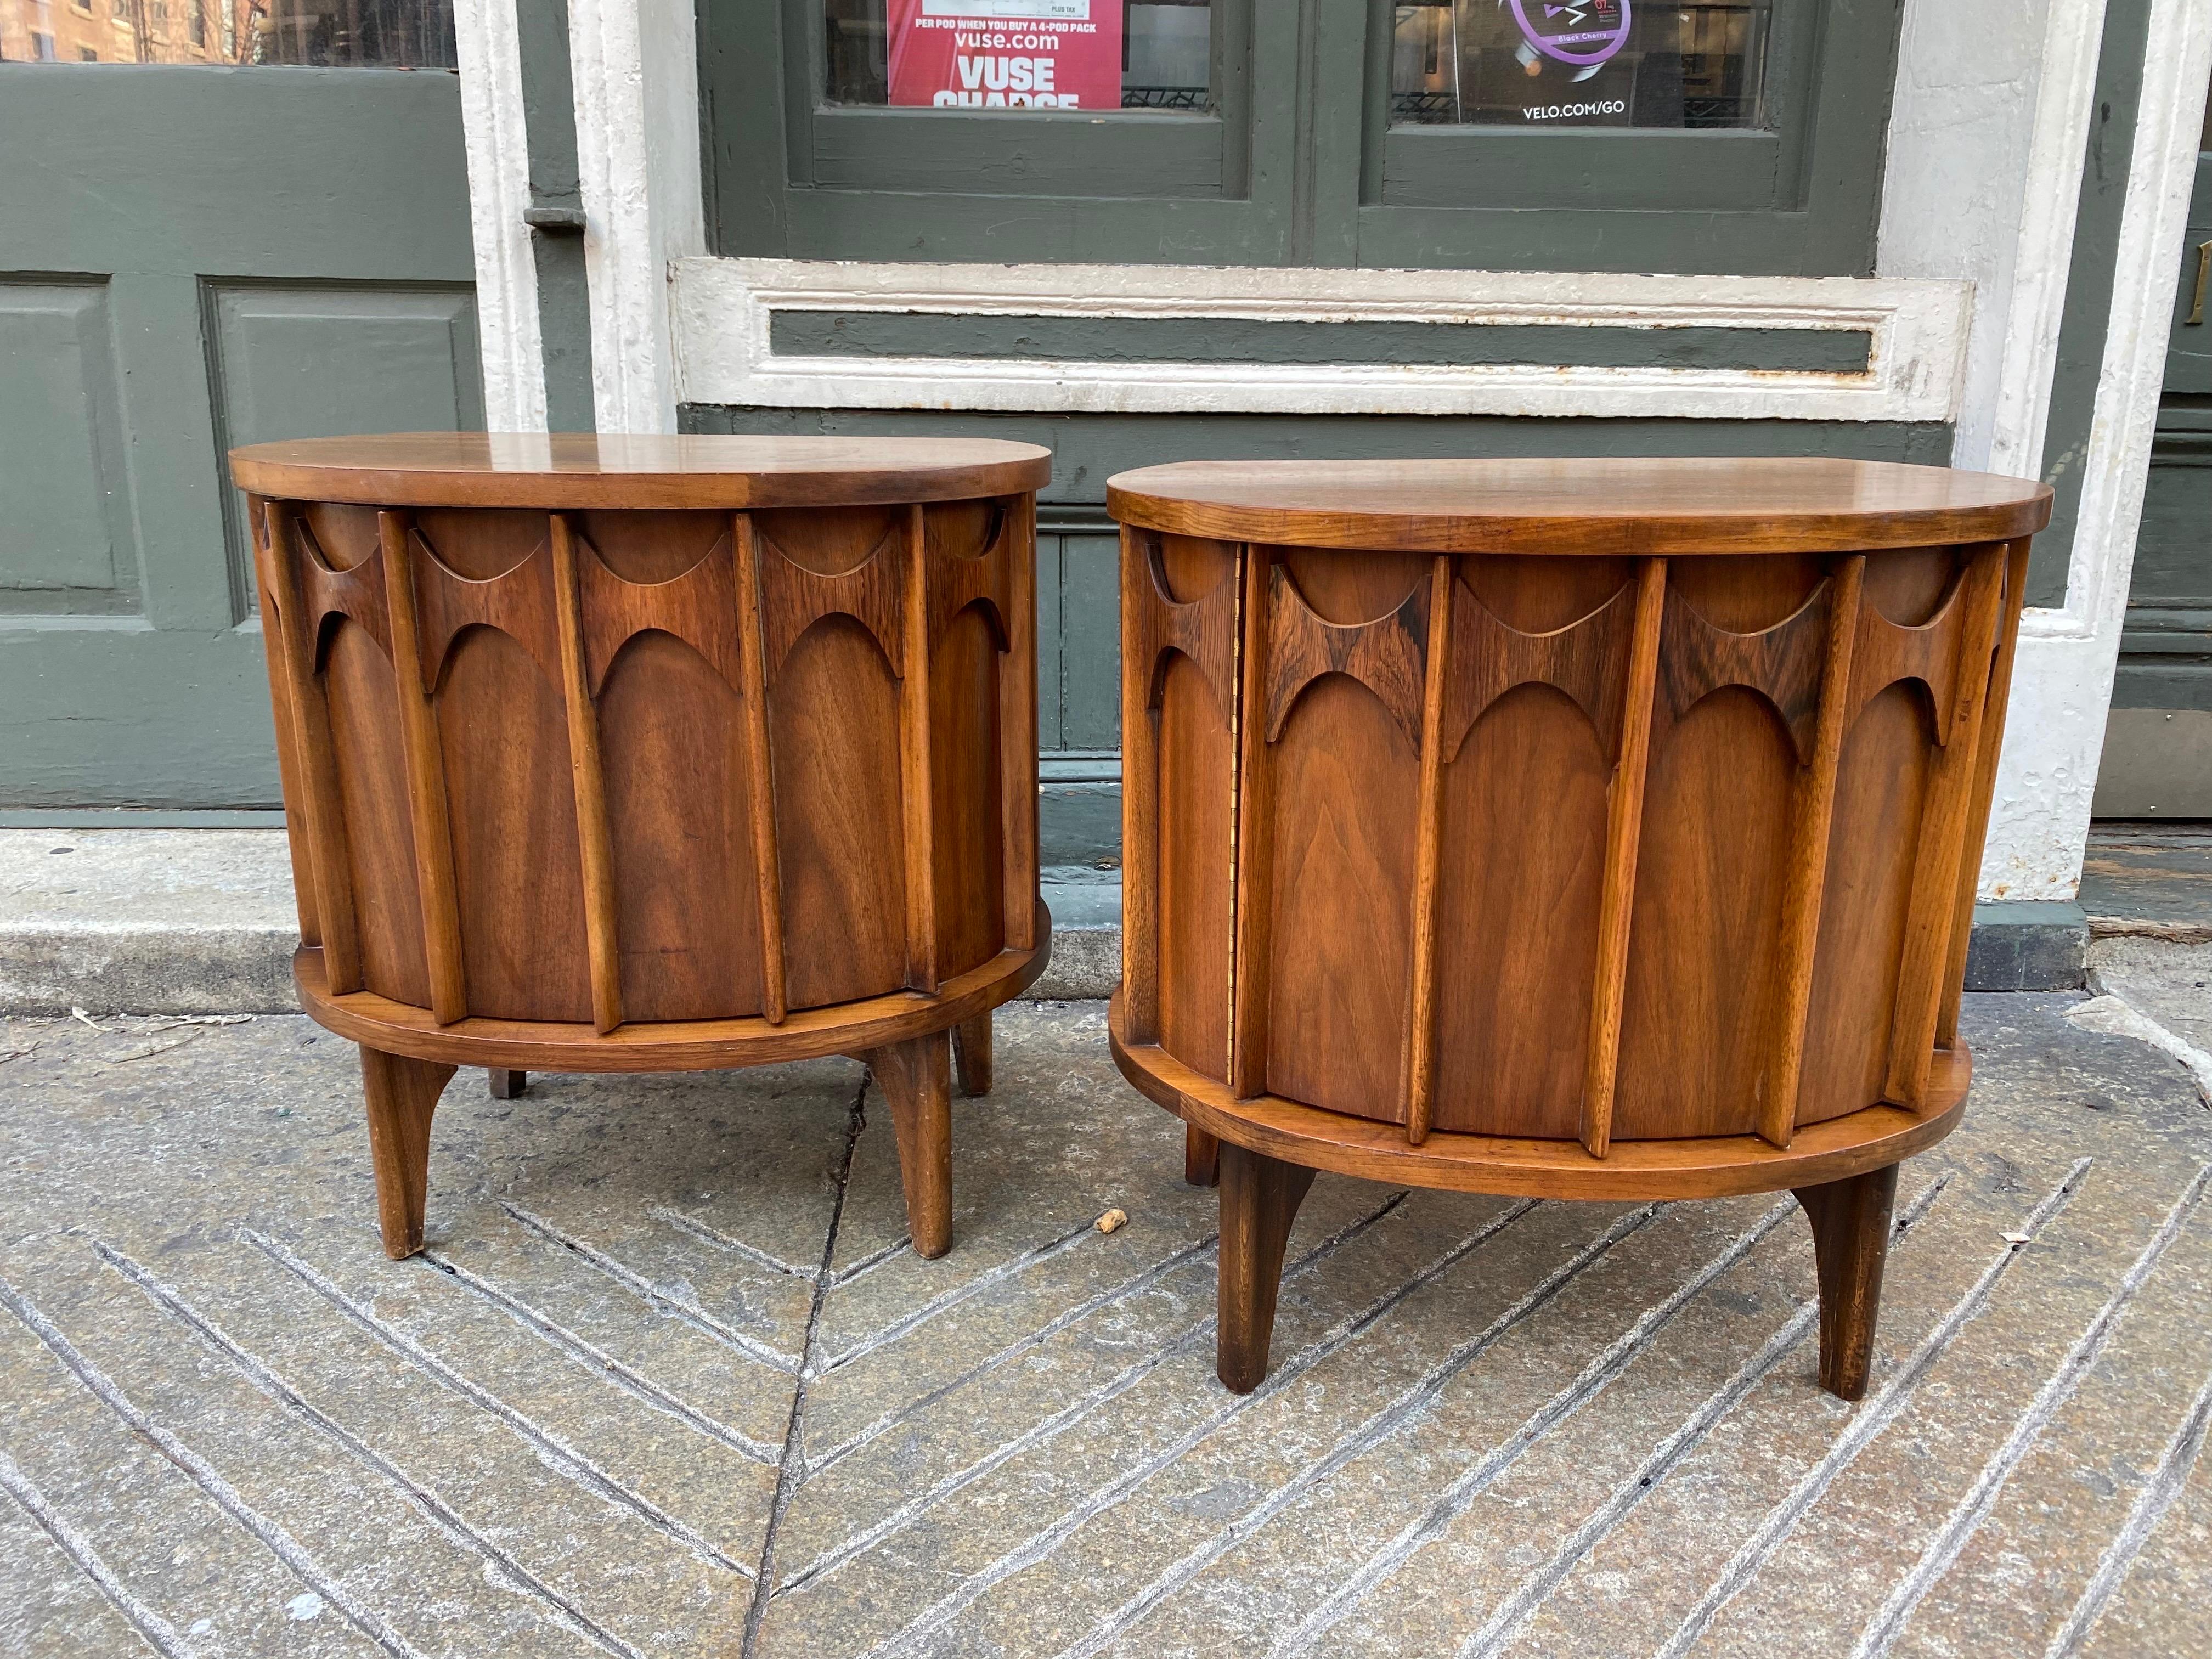 Kent Coffey Perspecta pair of walnut and rosewood nightstands. Unique and uncommon design! Good Original Condition, one nightstand shows mopre wear to top surface, probably the Husband's side! Overall in good Shape. Door swings open to reveal